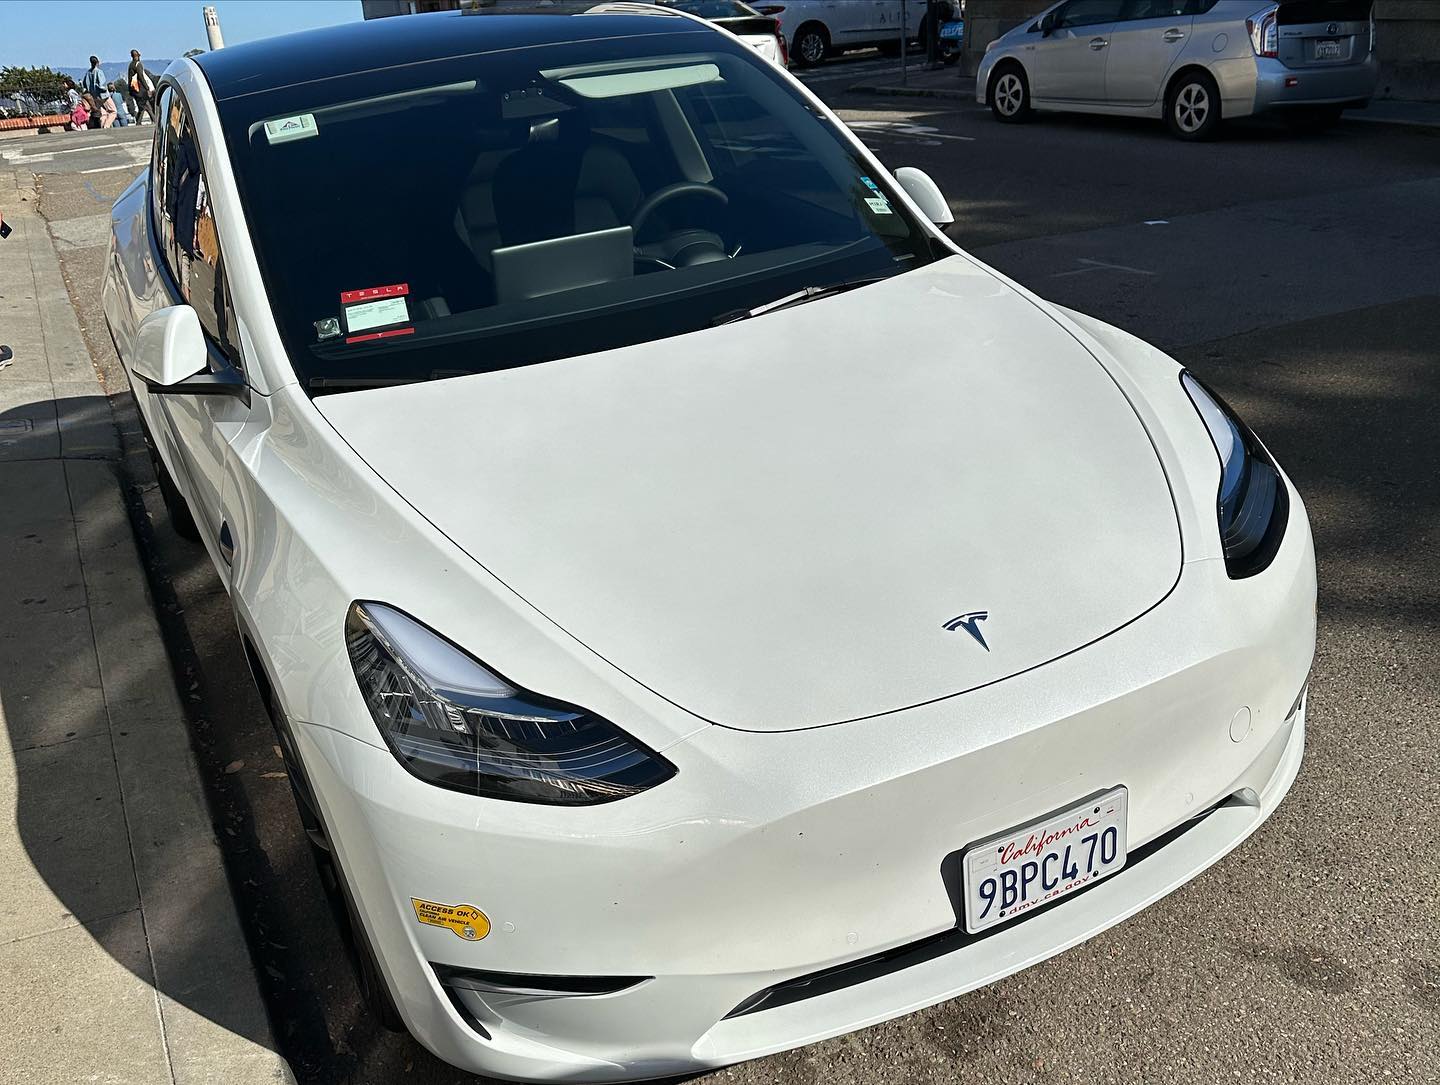 By Tesla through the streets of San Franscisco